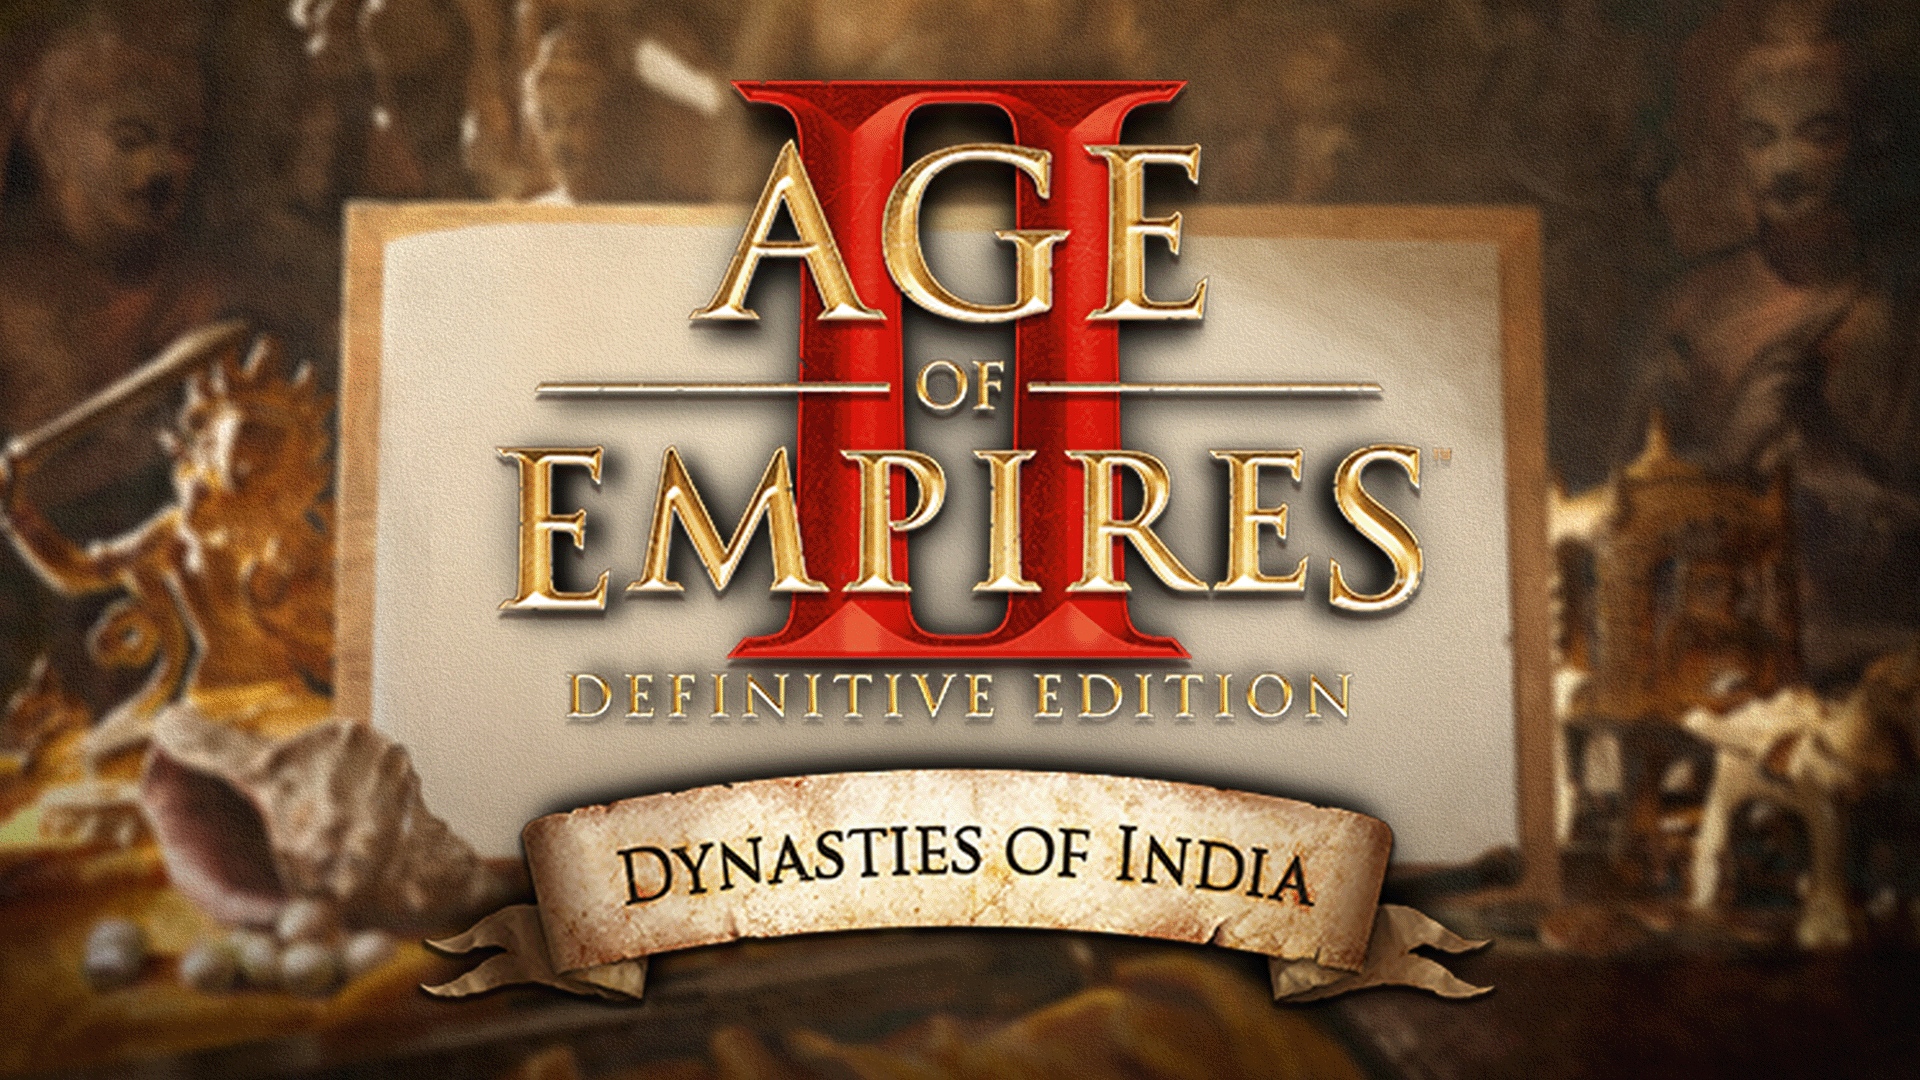 Image of the age of empires ii logo and words with the new dynasties of india dlc banner underneath